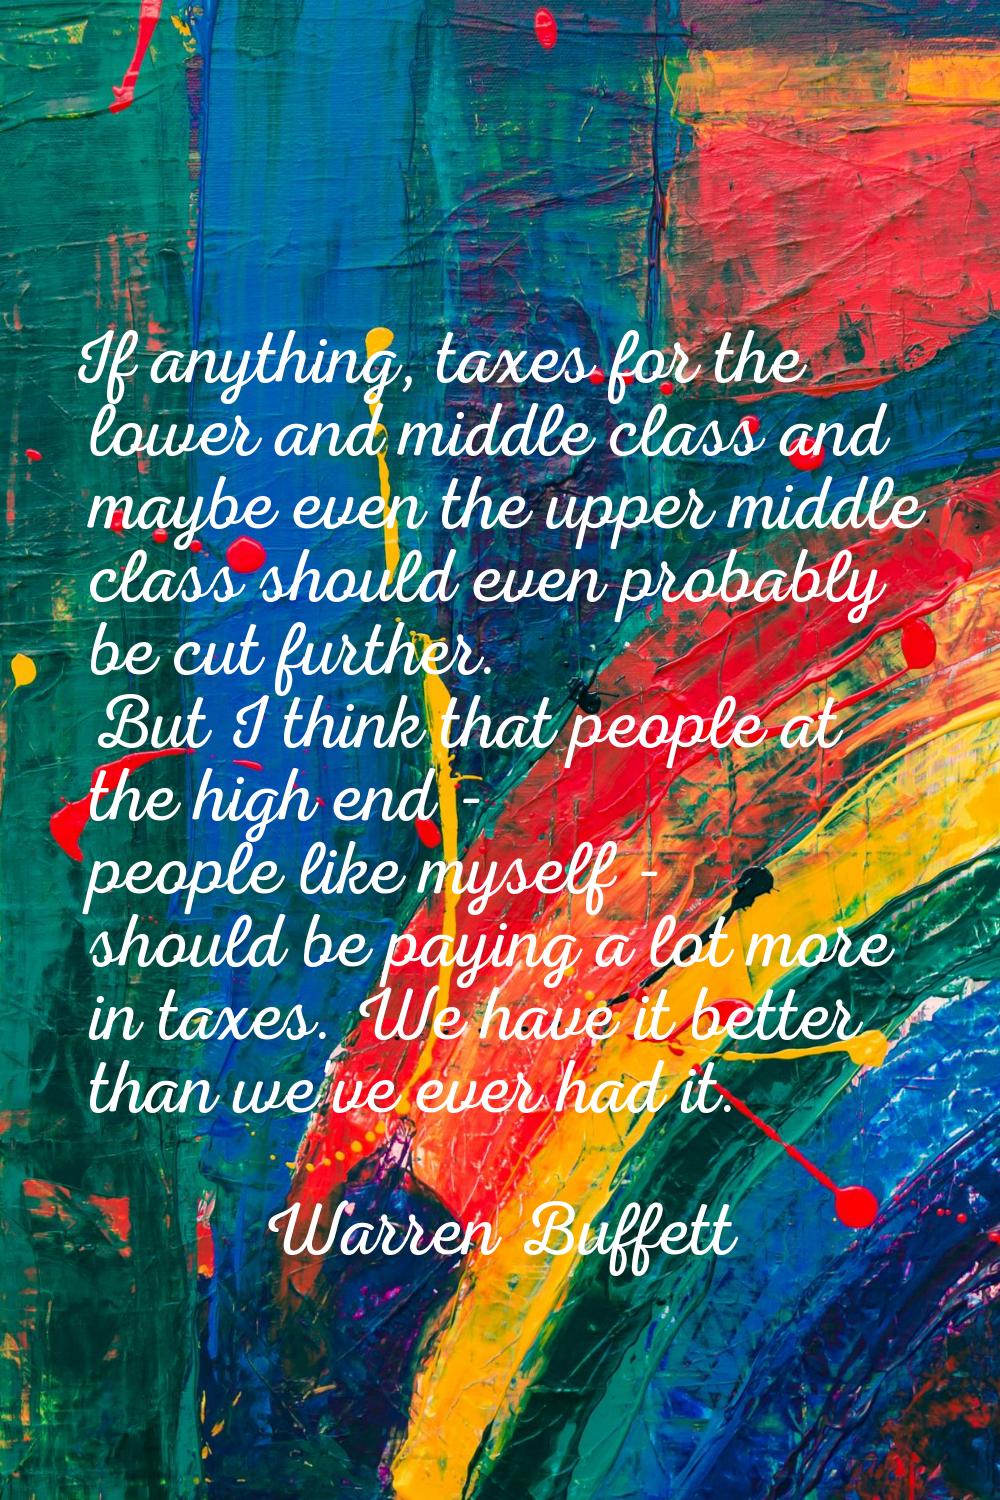 If anything, taxes for the lower and middle class and maybe even the upper middle class should even